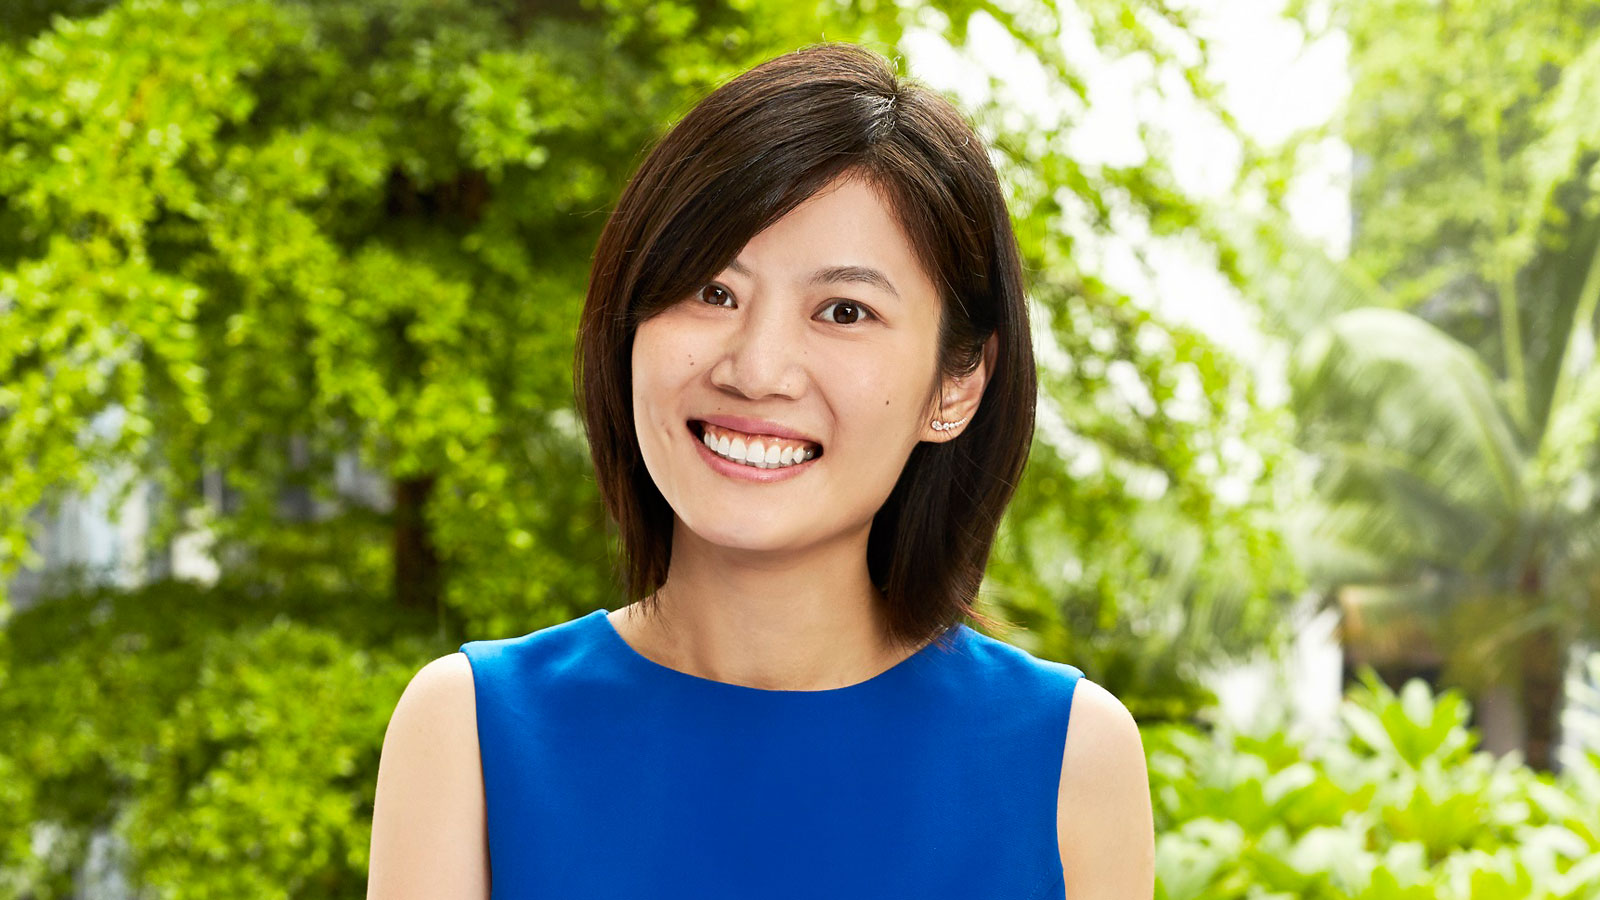 Ms Wu Yingshan is empowered by her company culture that has allowed her to try new ideas. 